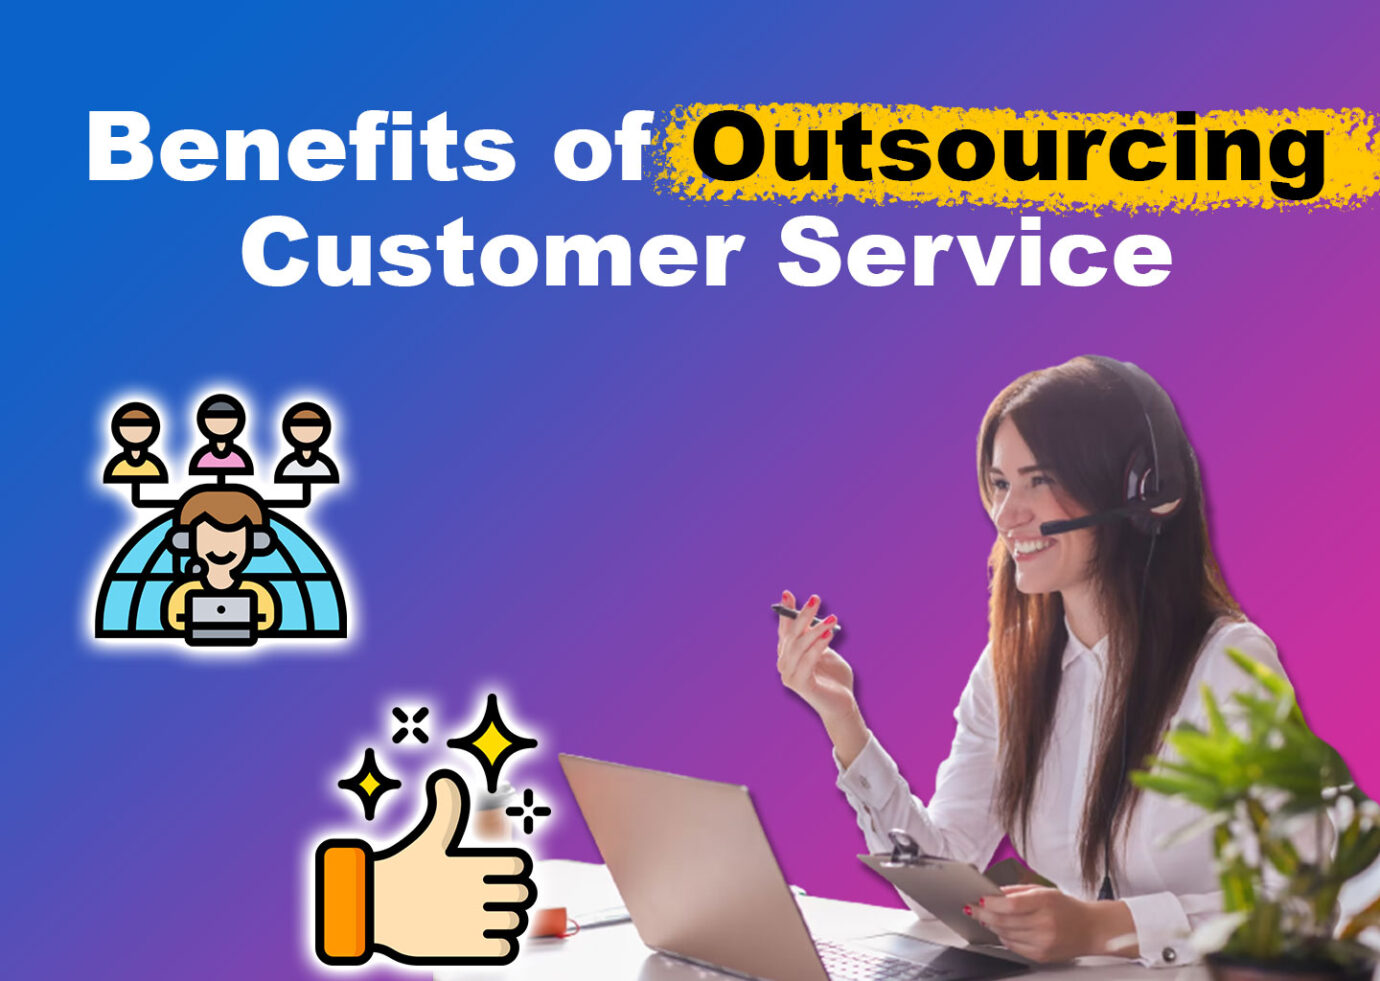 The Benefits of Outsourcing Customer Service